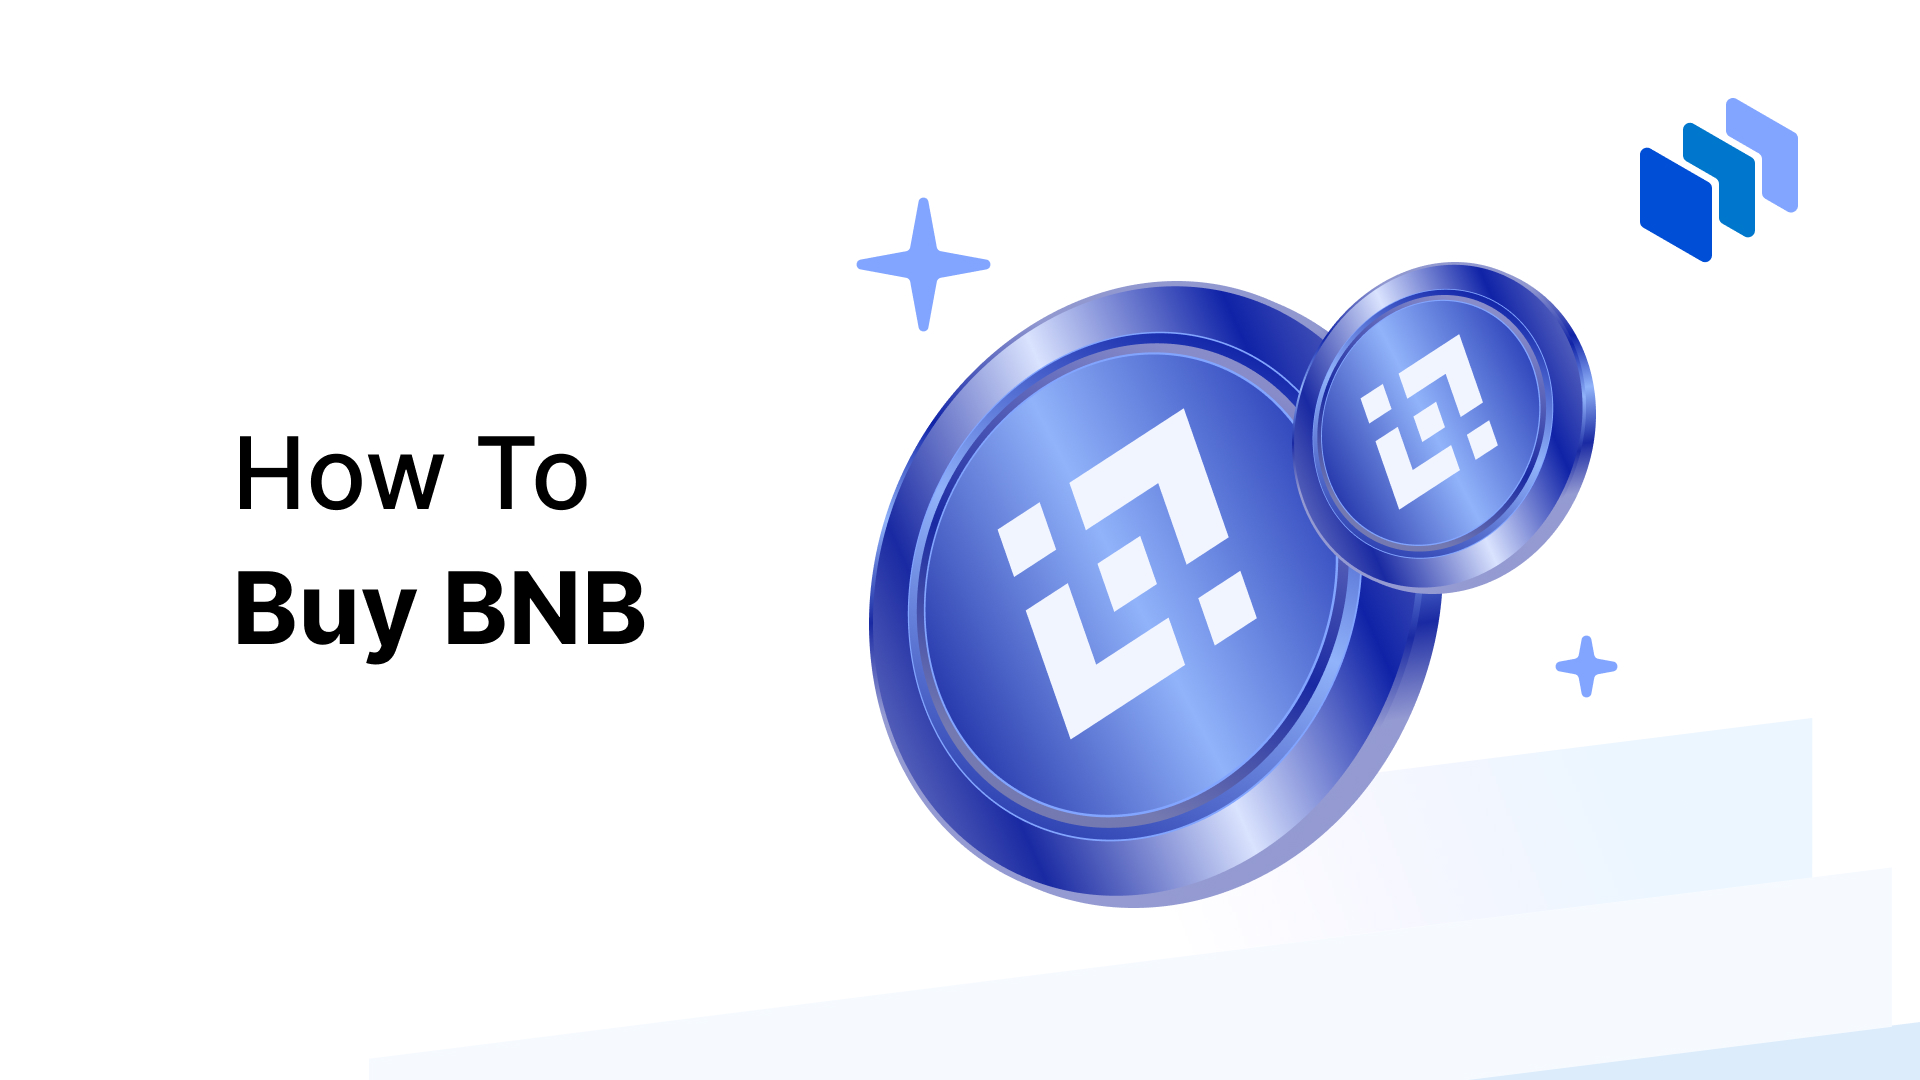 How To Buy BNB